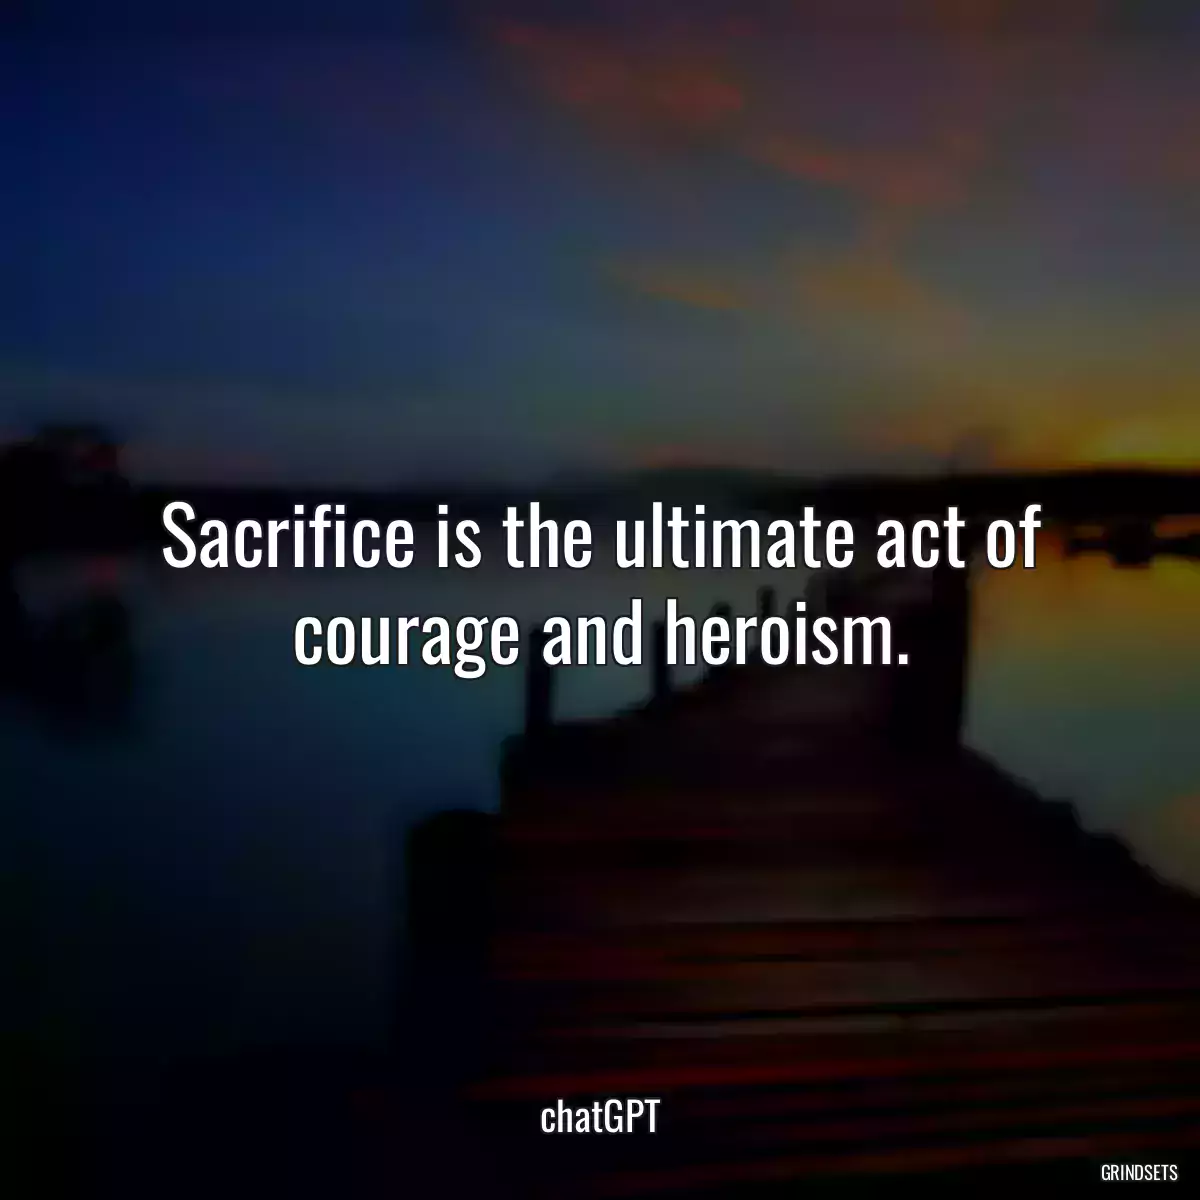 Sacrifice is the ultimate act of courage and heroism.